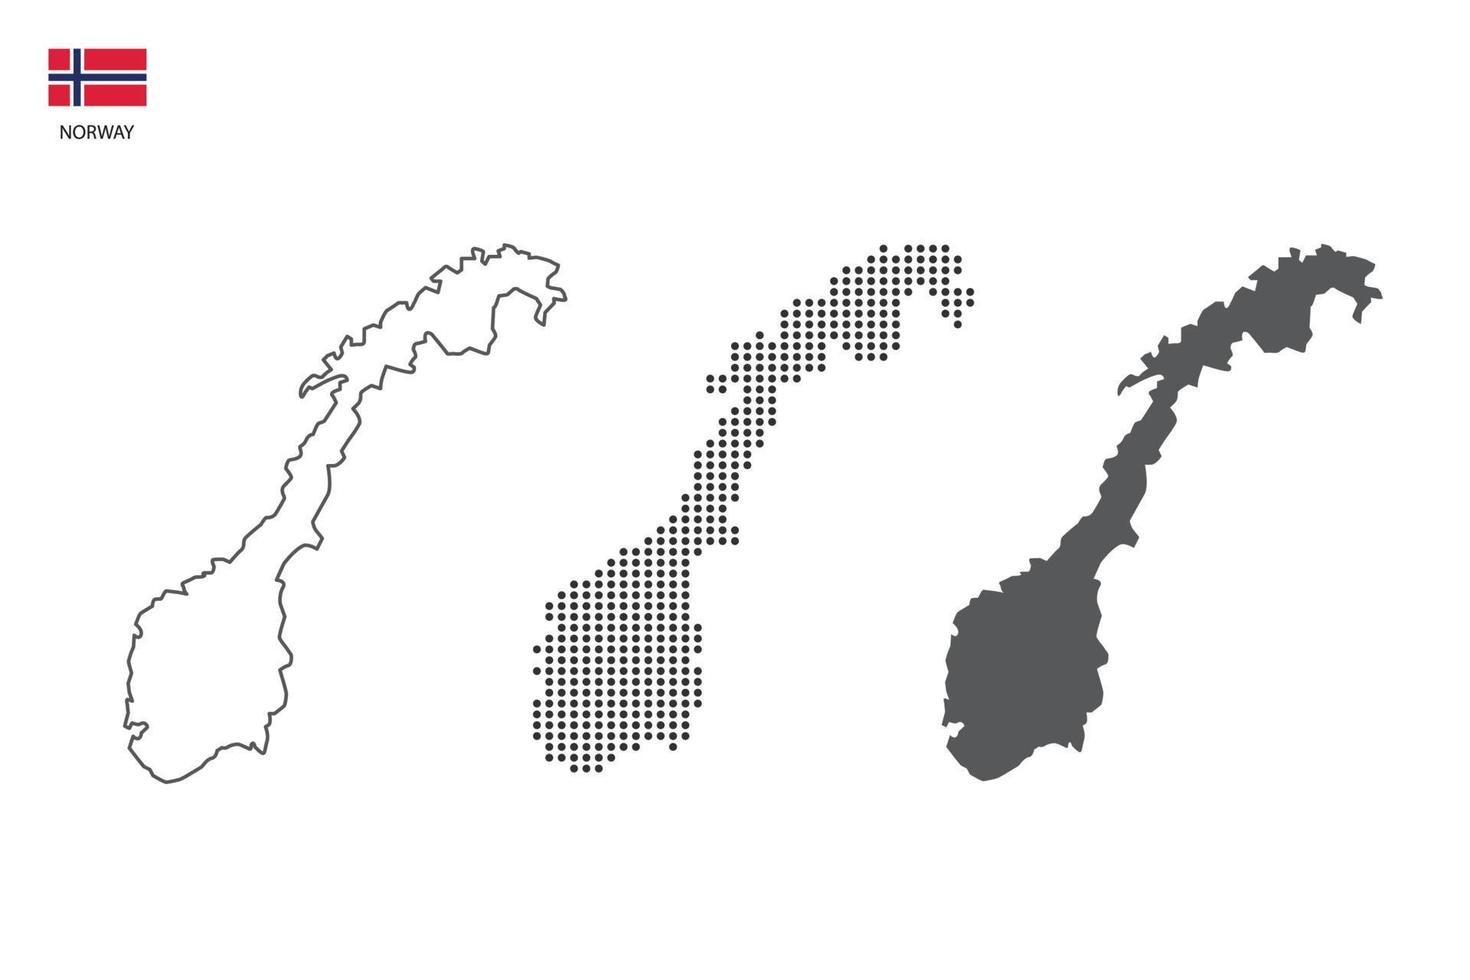 3 versions of Norway map city vector by thin black outline simplicity style, Black dot style and Dark shadow style. All in the white background.